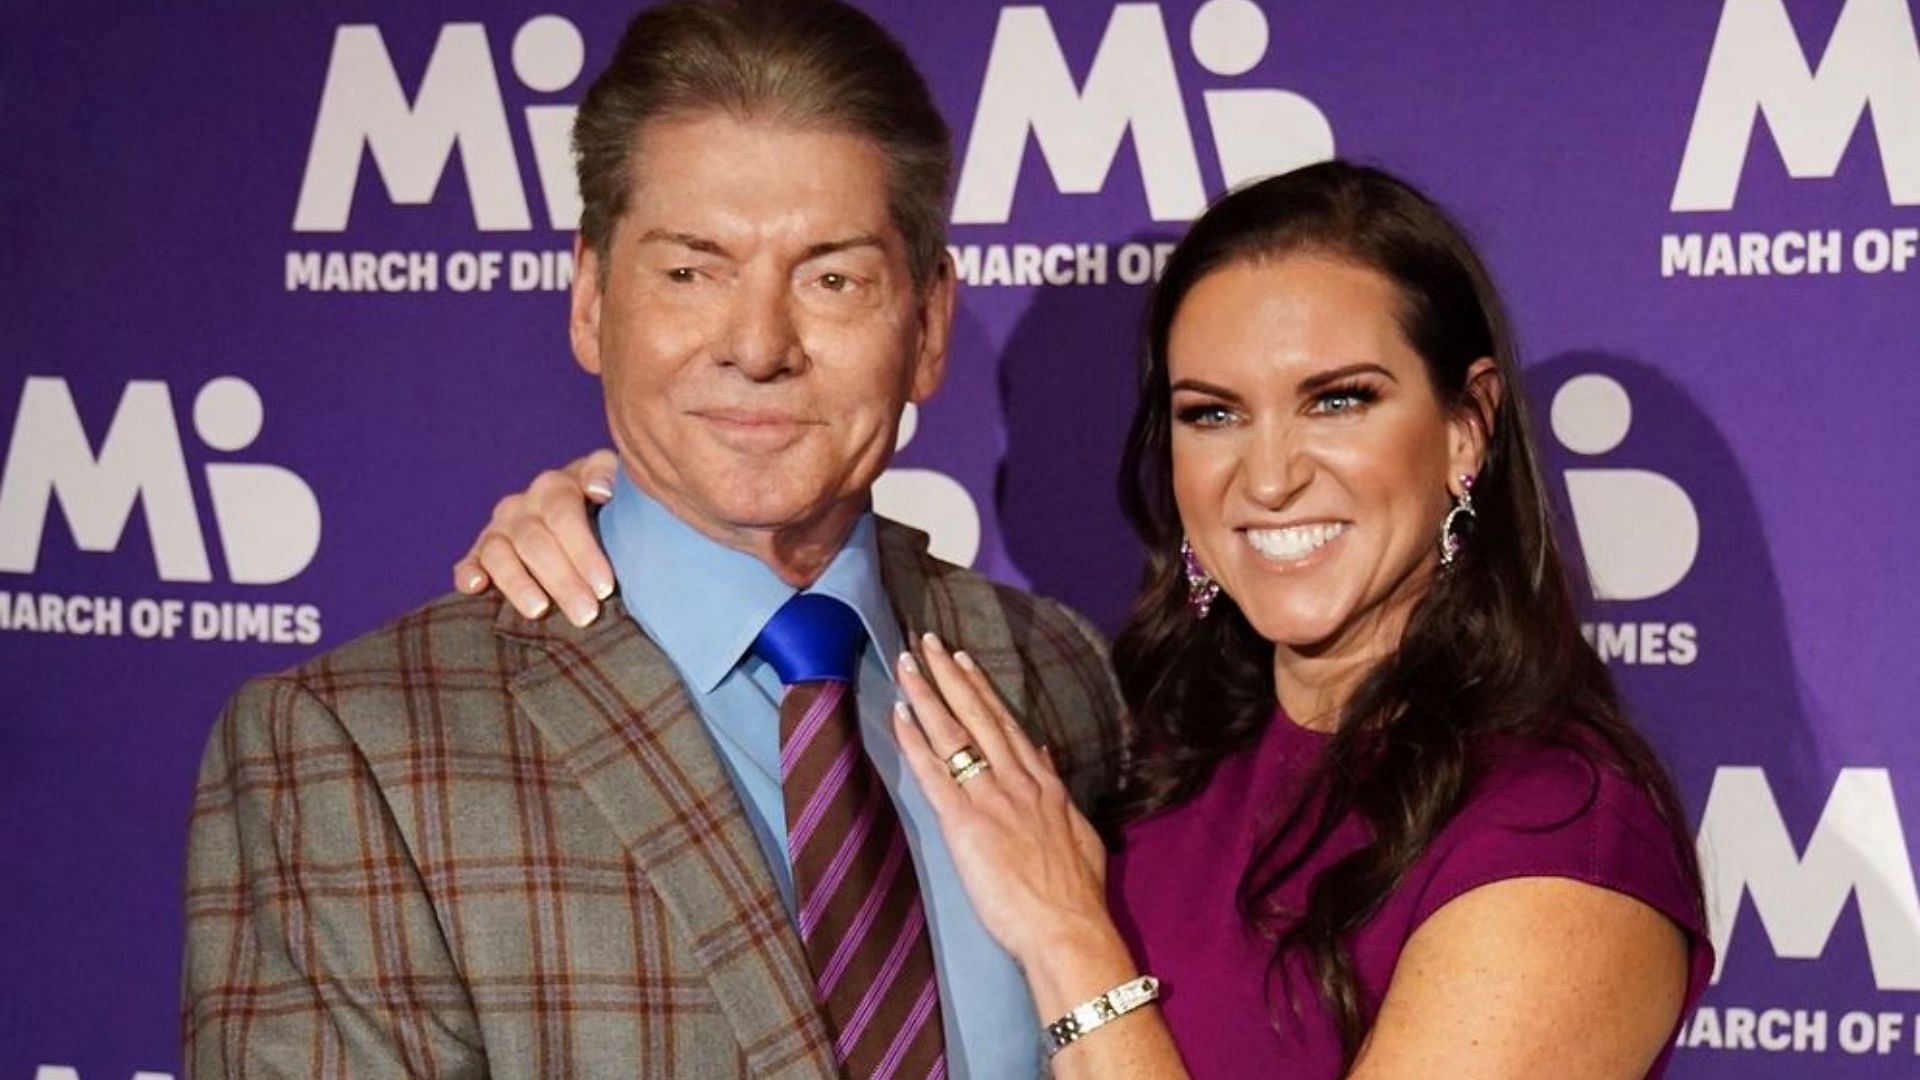 Vince McMahon (left) announced his retirement on Twitter a few hours ago